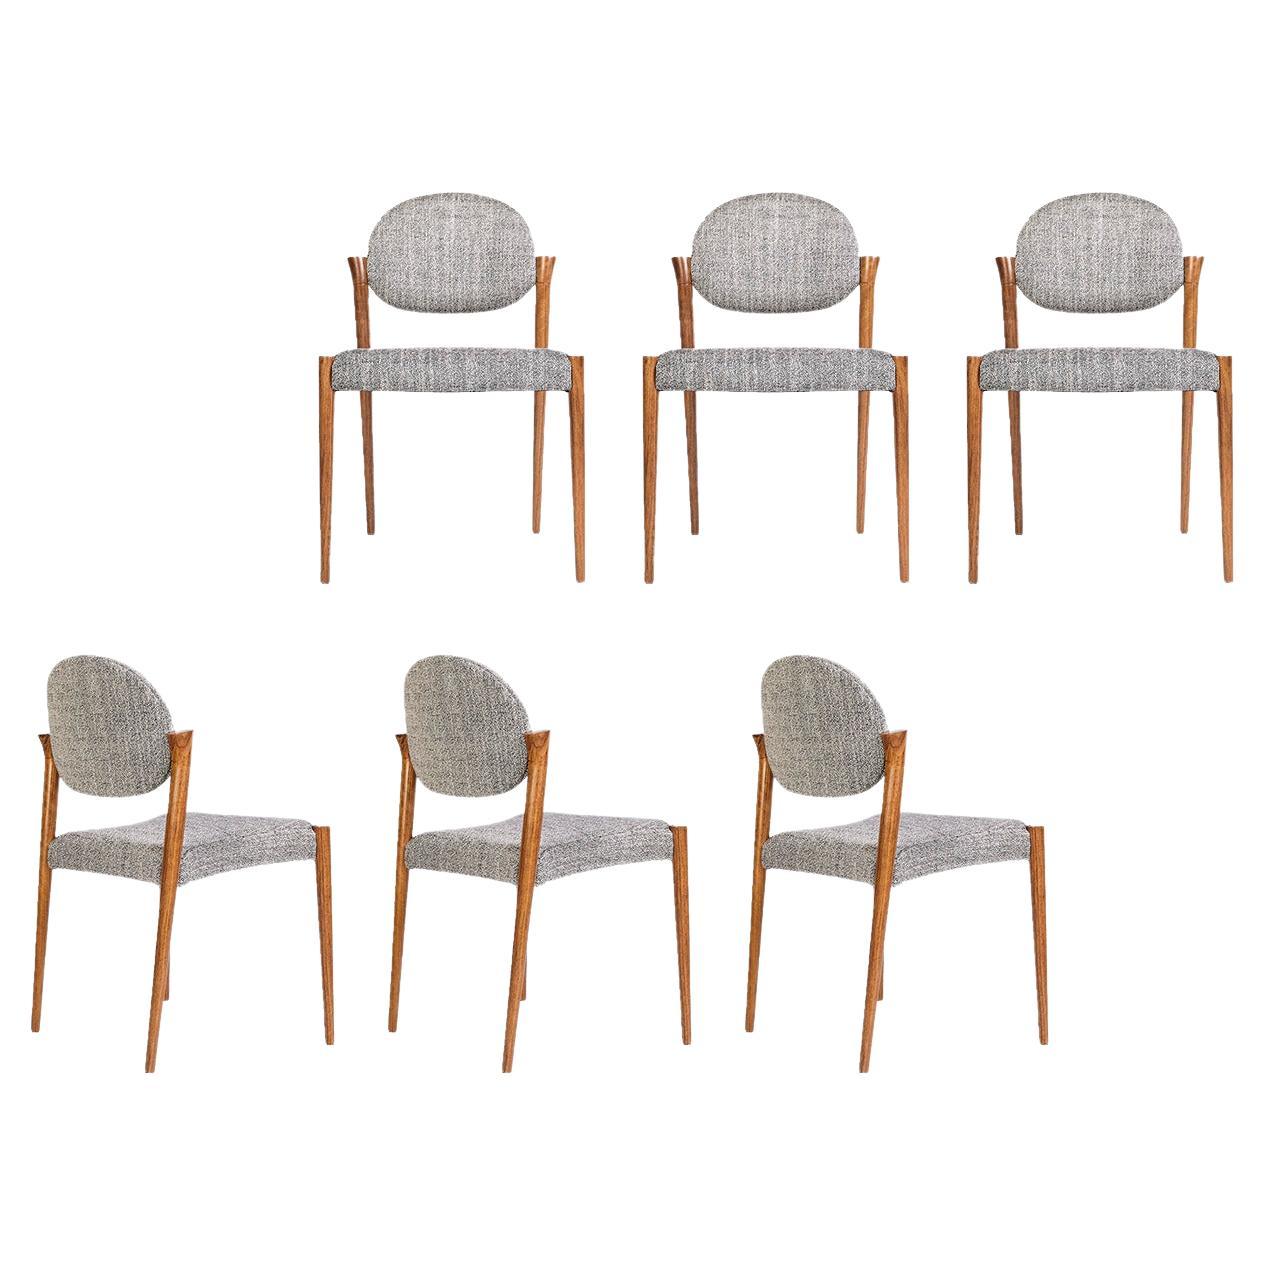 Tanoco Small Chair Set of 6 Chairs, Mutenye Wood, Handcrafted by Duistt en vente